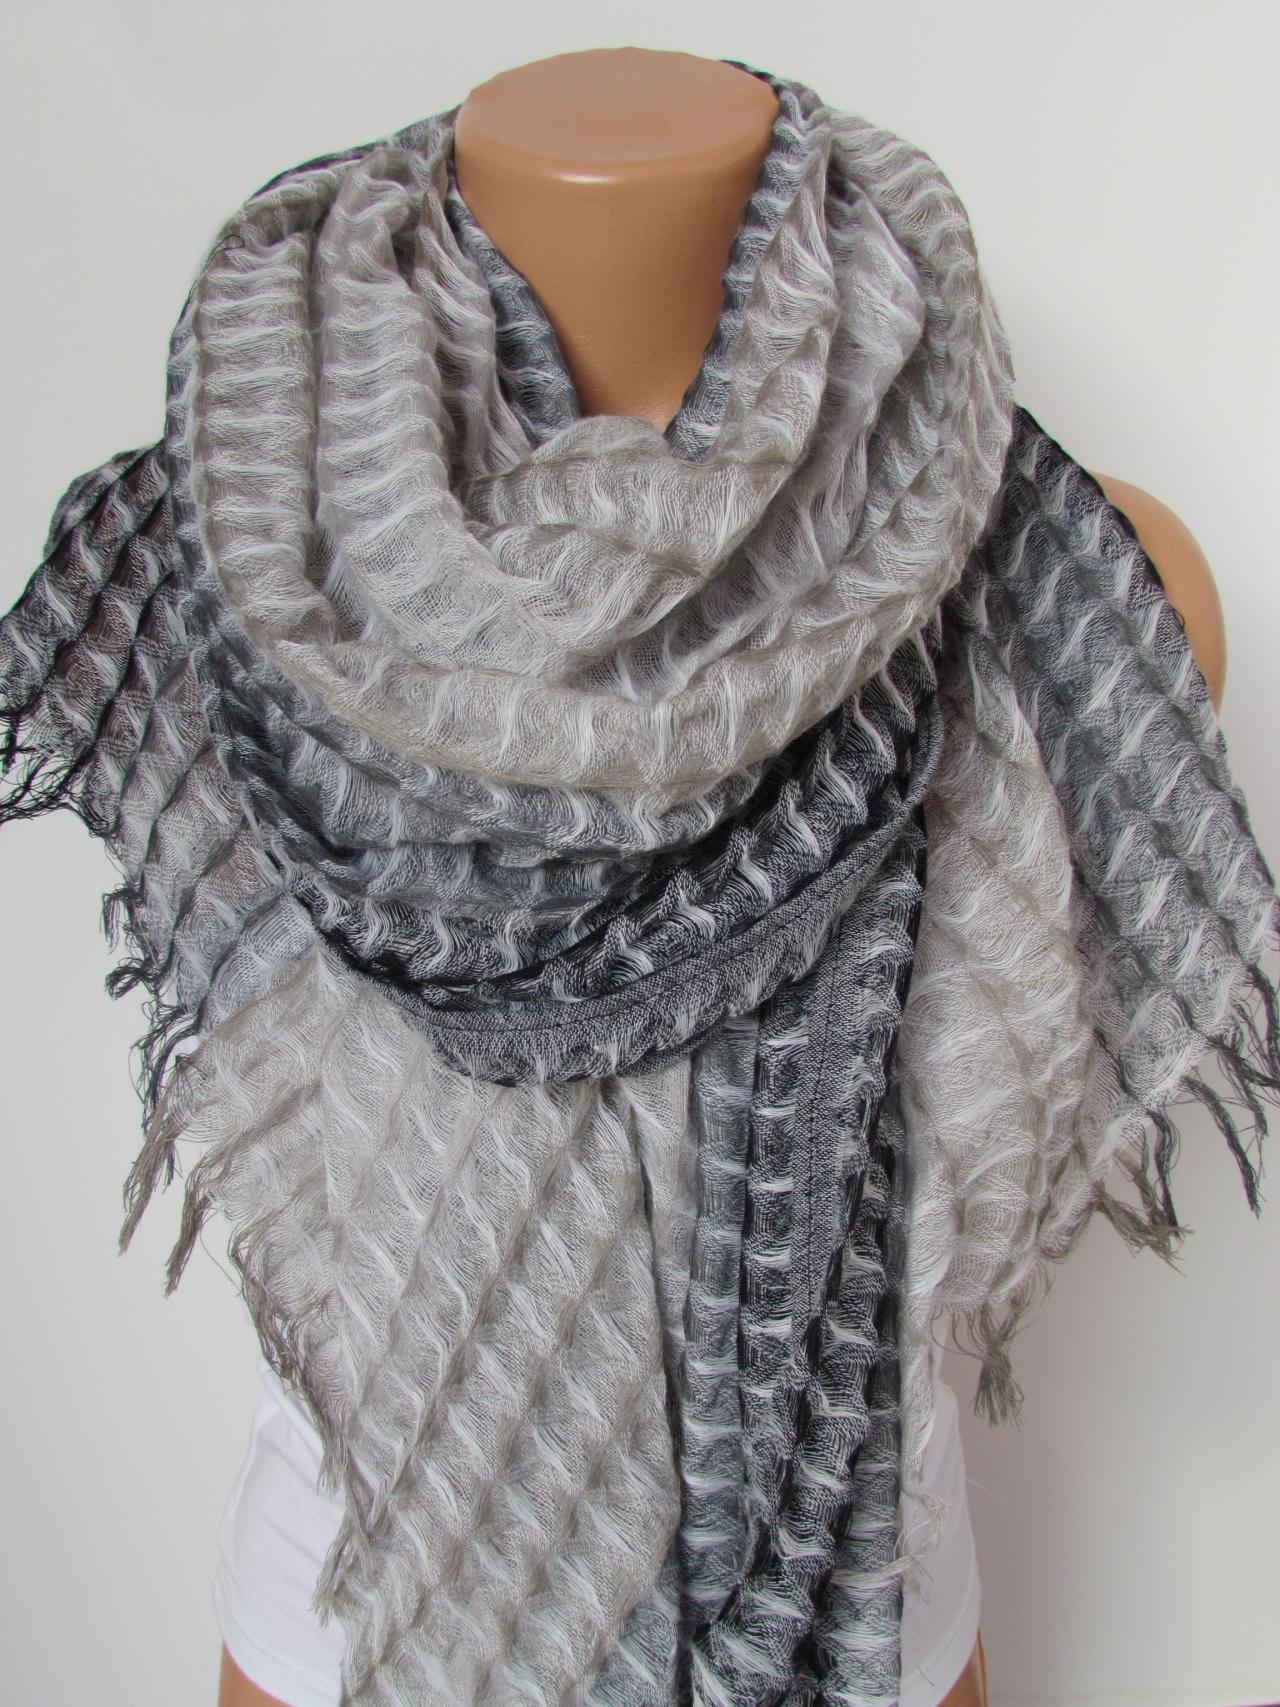 Gray and Beige Long Scarf -Shawl Scarf-New Season-Necklace-Cowl- Neckwarmer- Infinity Scarf-Mother's Day Gift